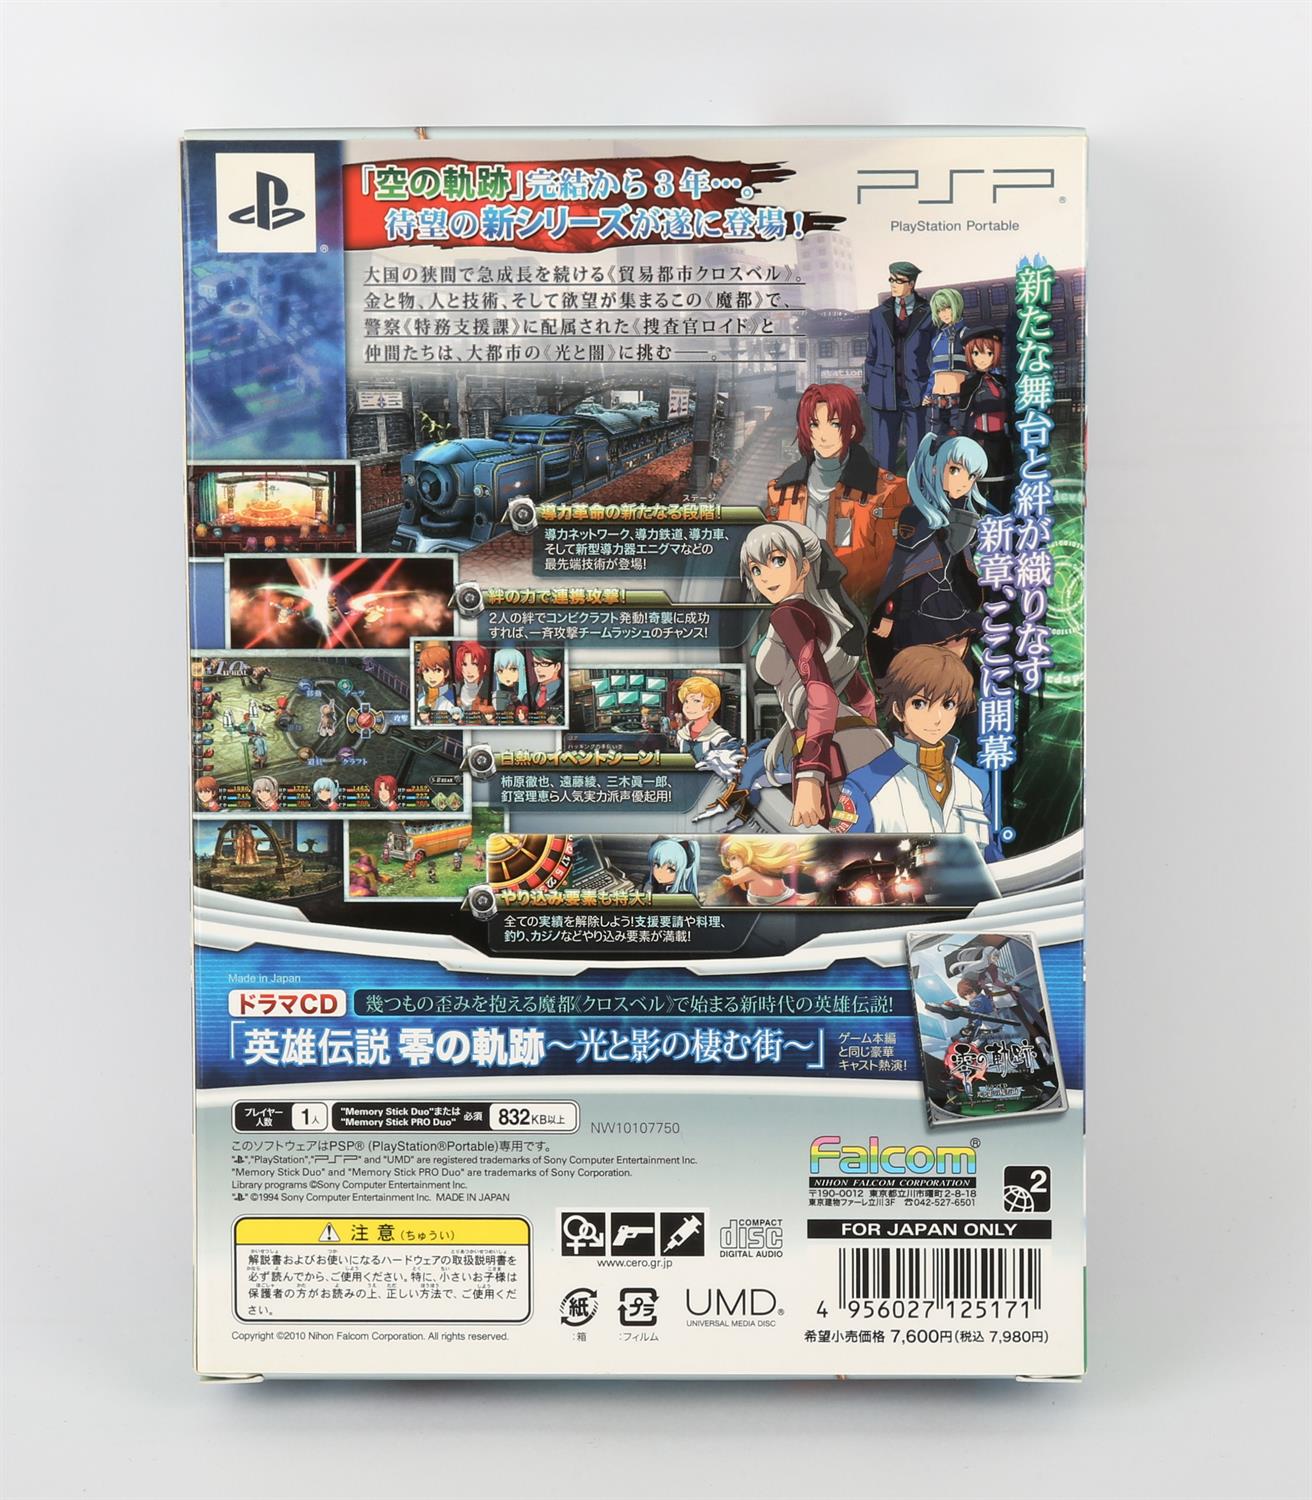 PlayStation Portable (PSP) The Legend of Heroes: Trails from Zero [Limited Edition] with CD - Image 2 of 2